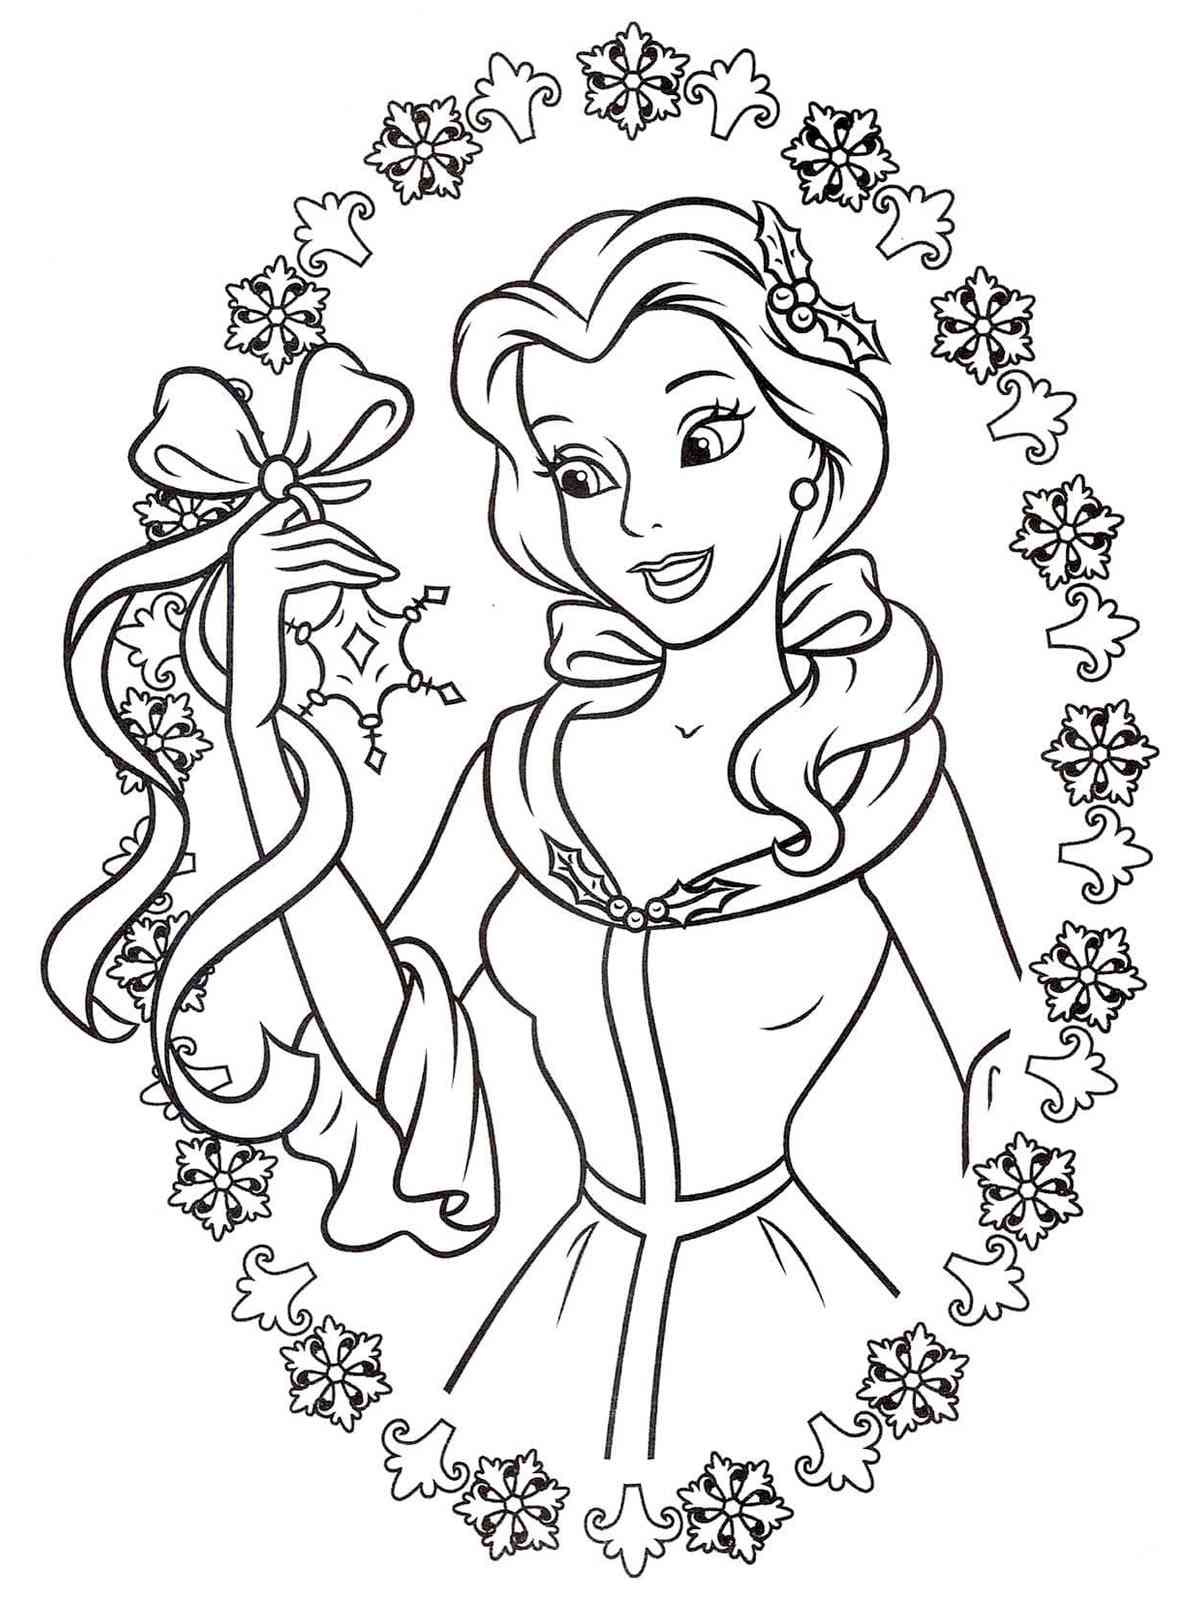 Disney Christmas 30 coloring page